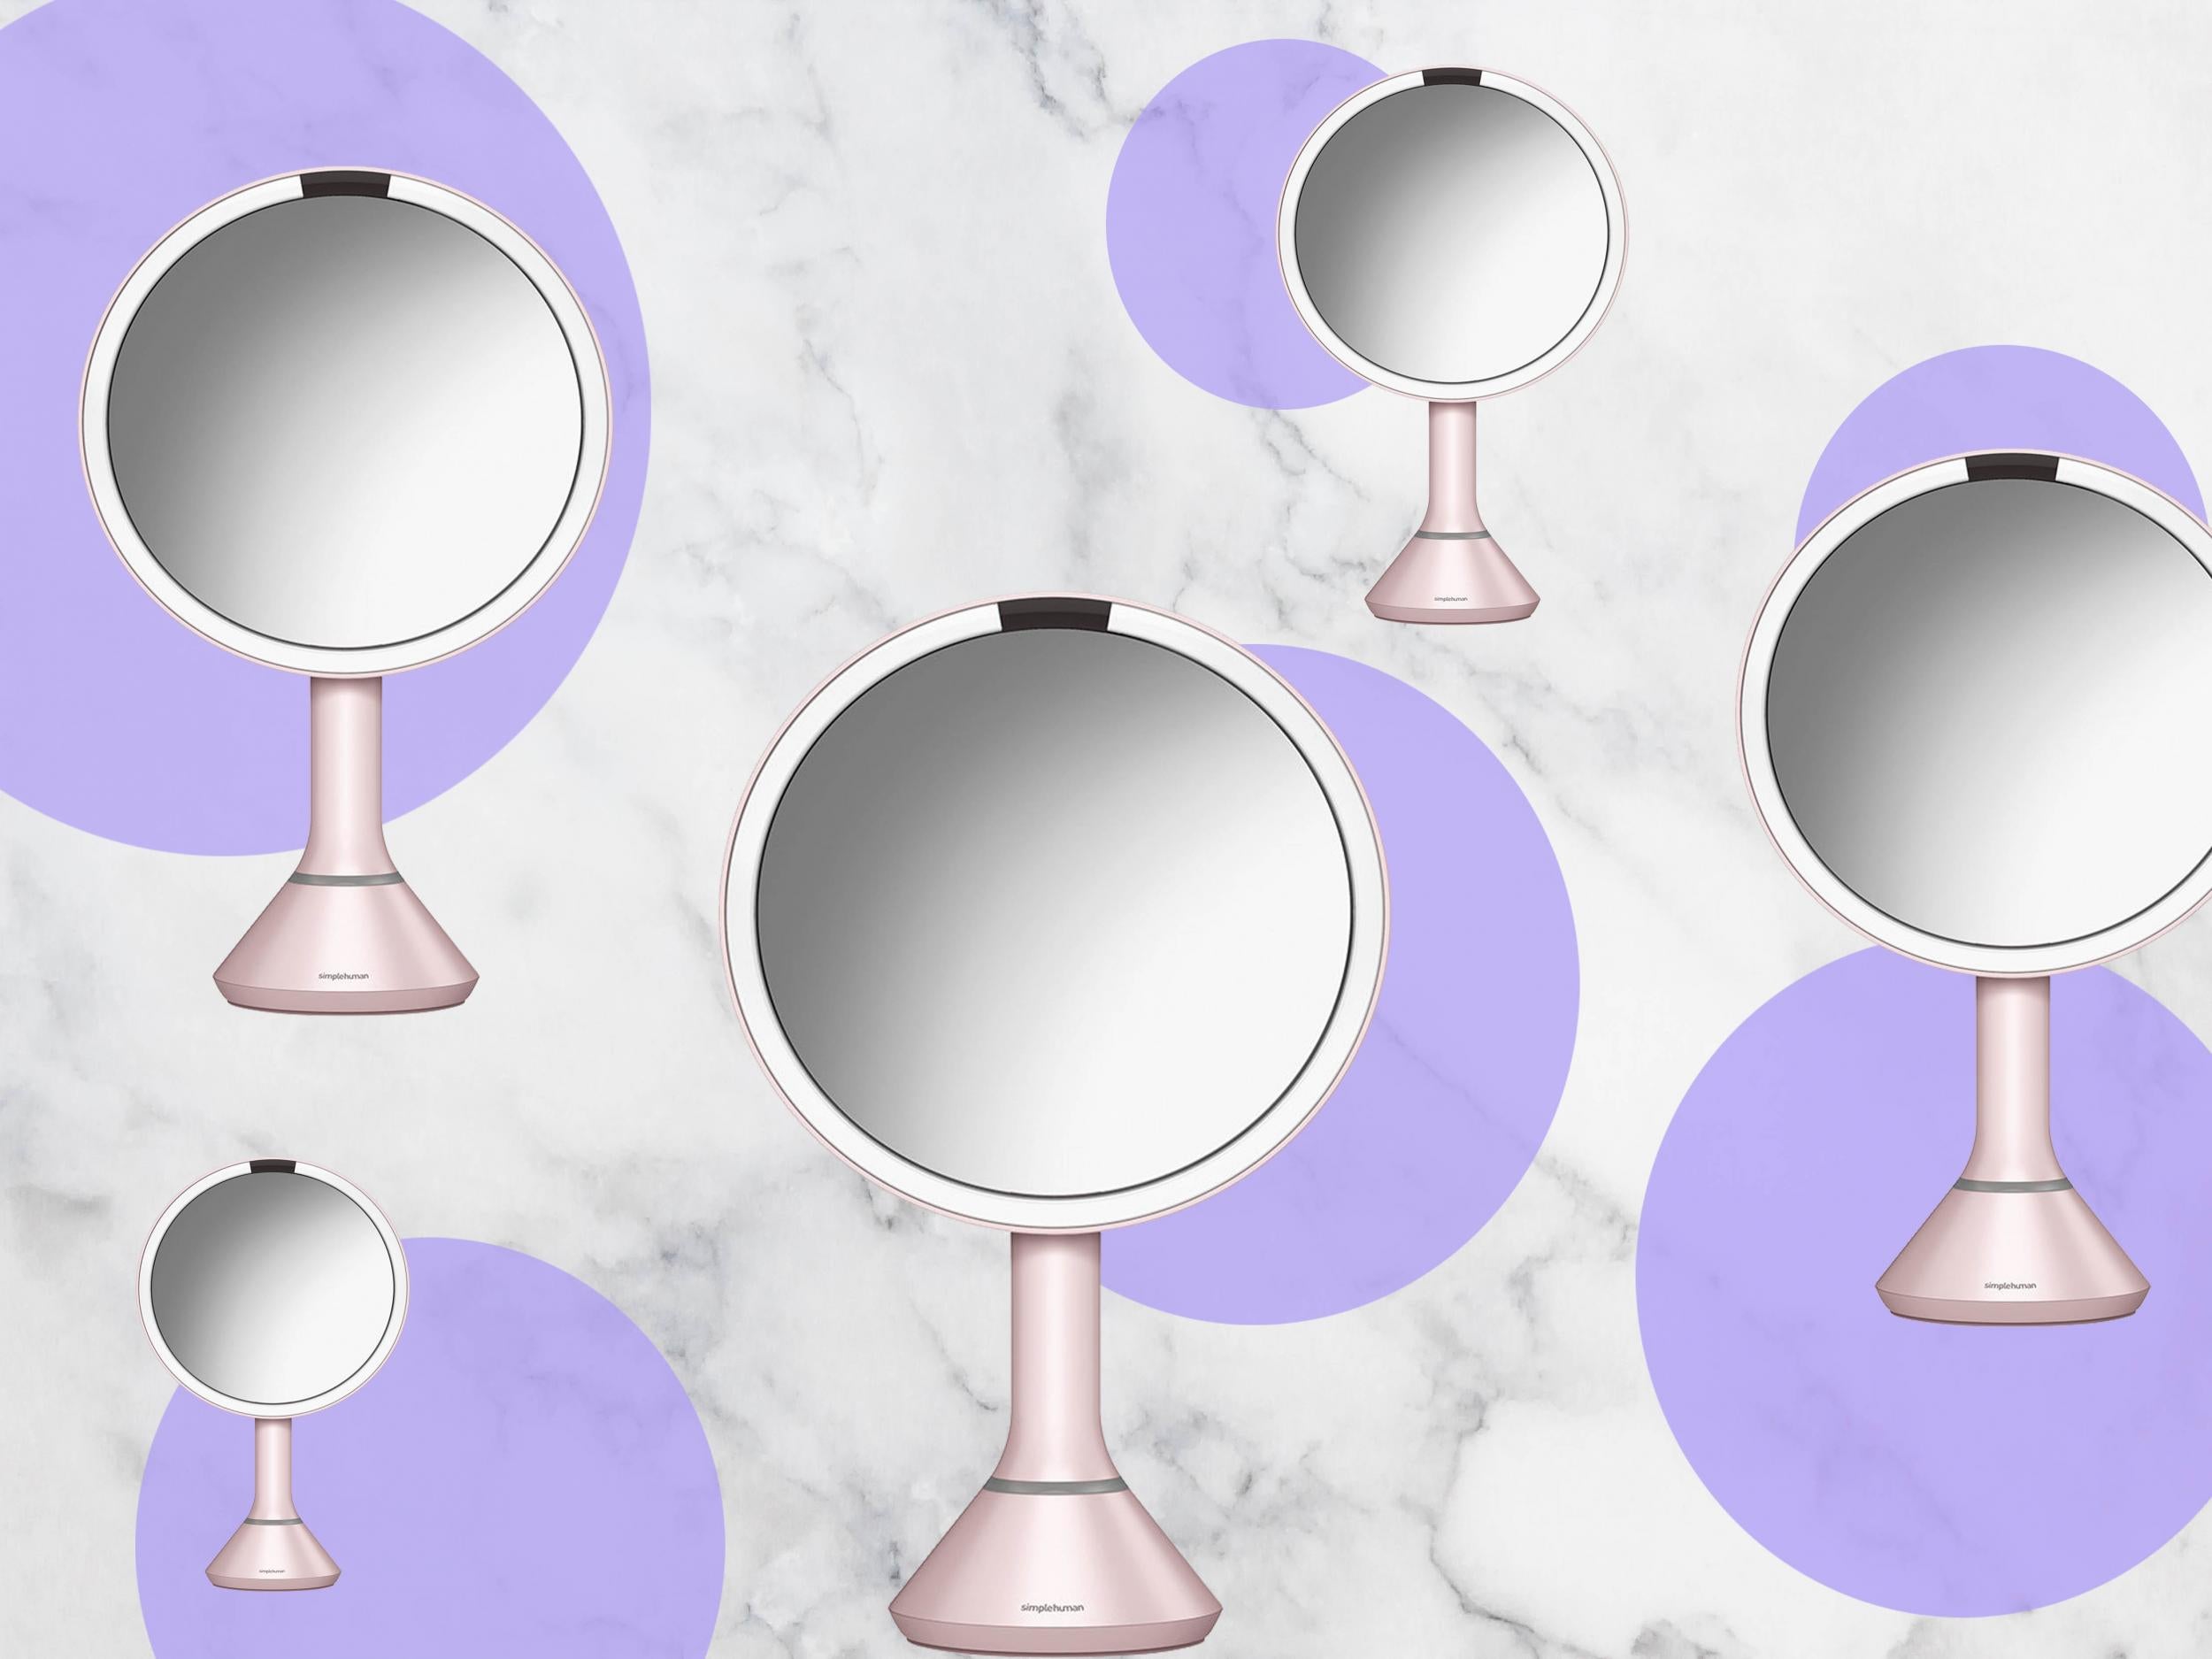 Best Dressing Table Mirrors To Turn Your Room Into A Boudoir The Independent,Open Concept Living Room Modern Home Interior Design